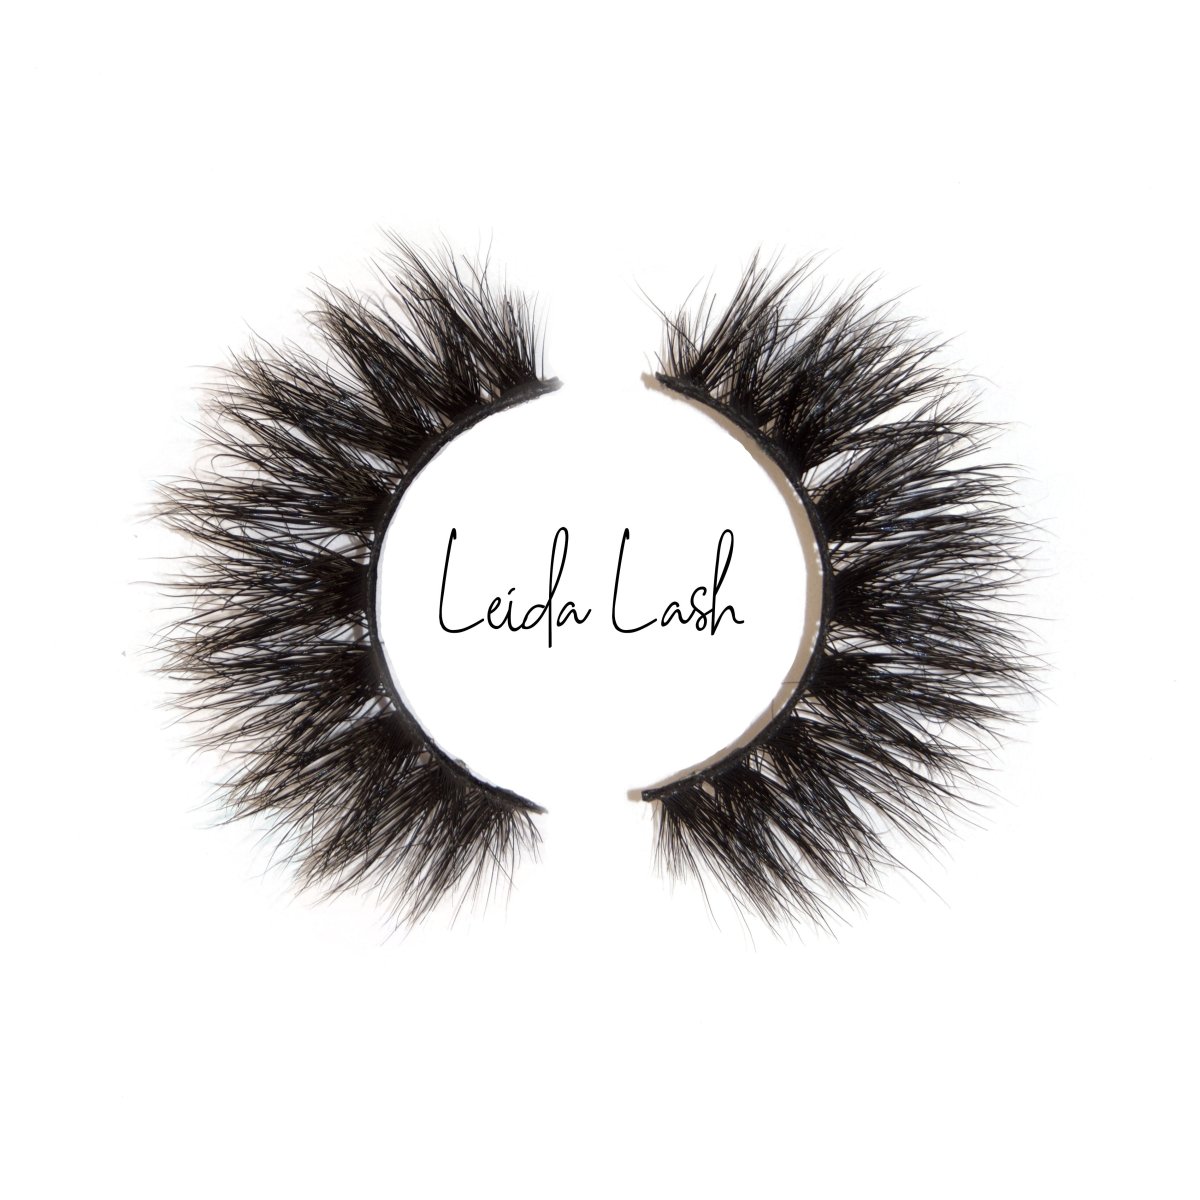 22mm lashes in the style vibes made with 3d mink fur